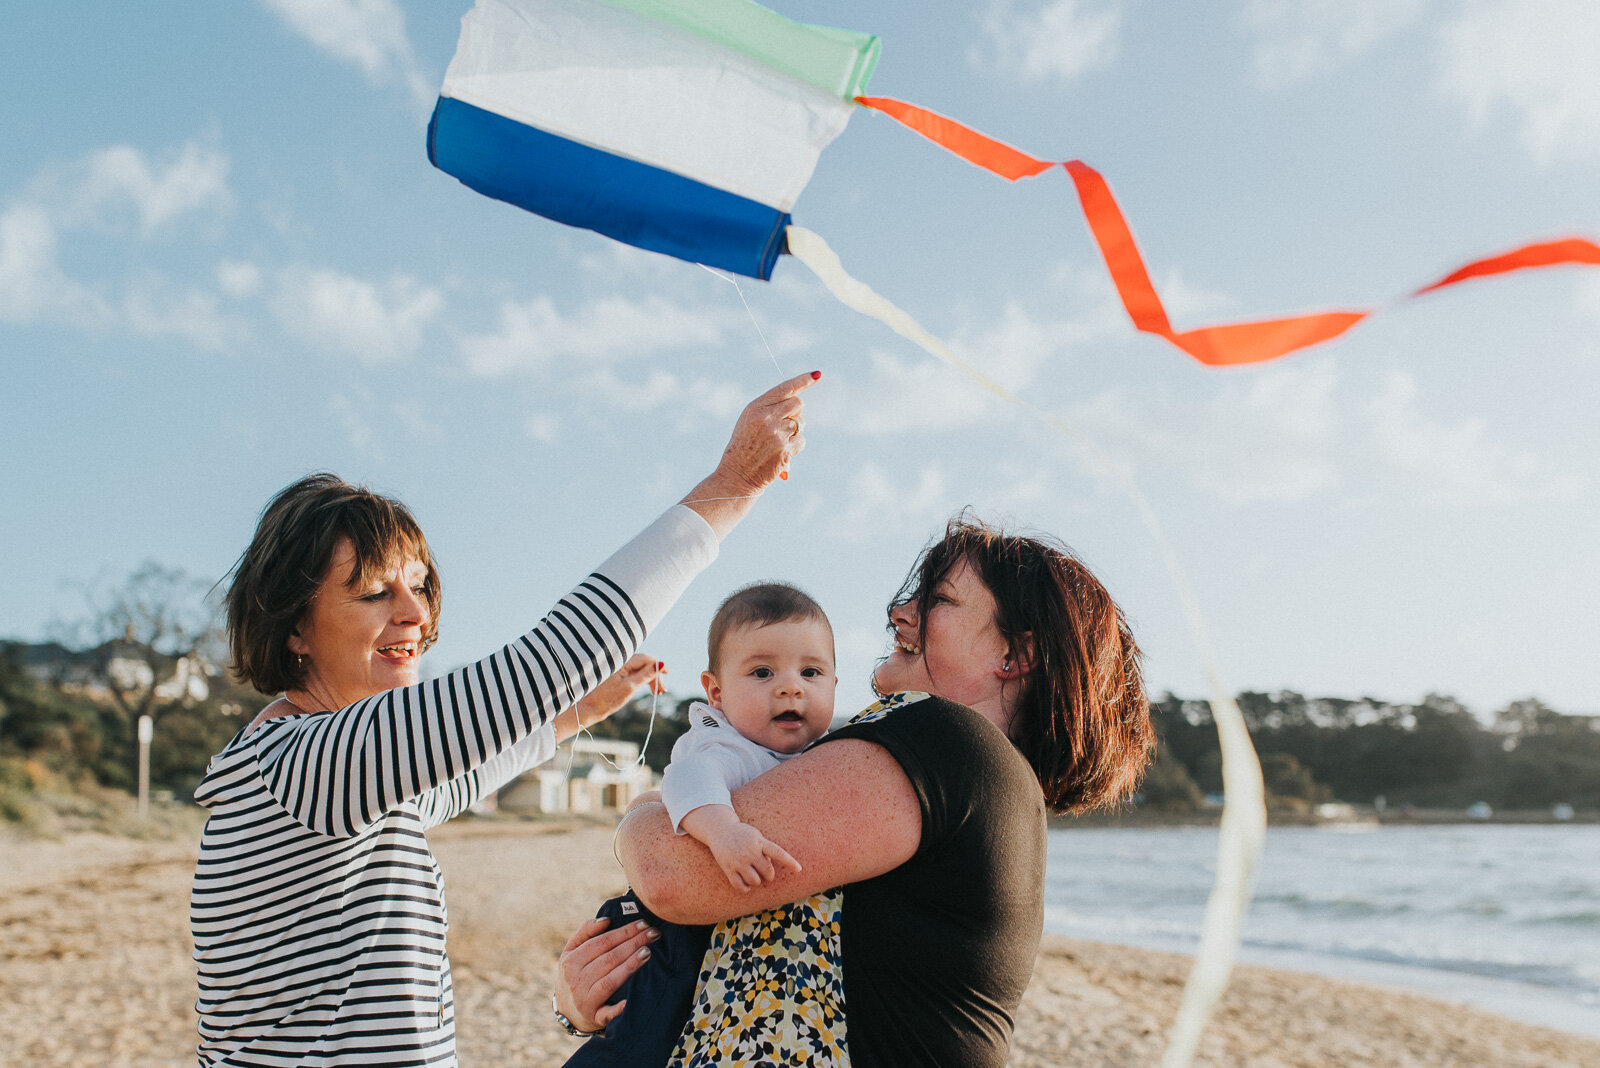 grandmother_mother_grandson_flying_kite_together_at_beach_melbourne_family_photography-13.jpg